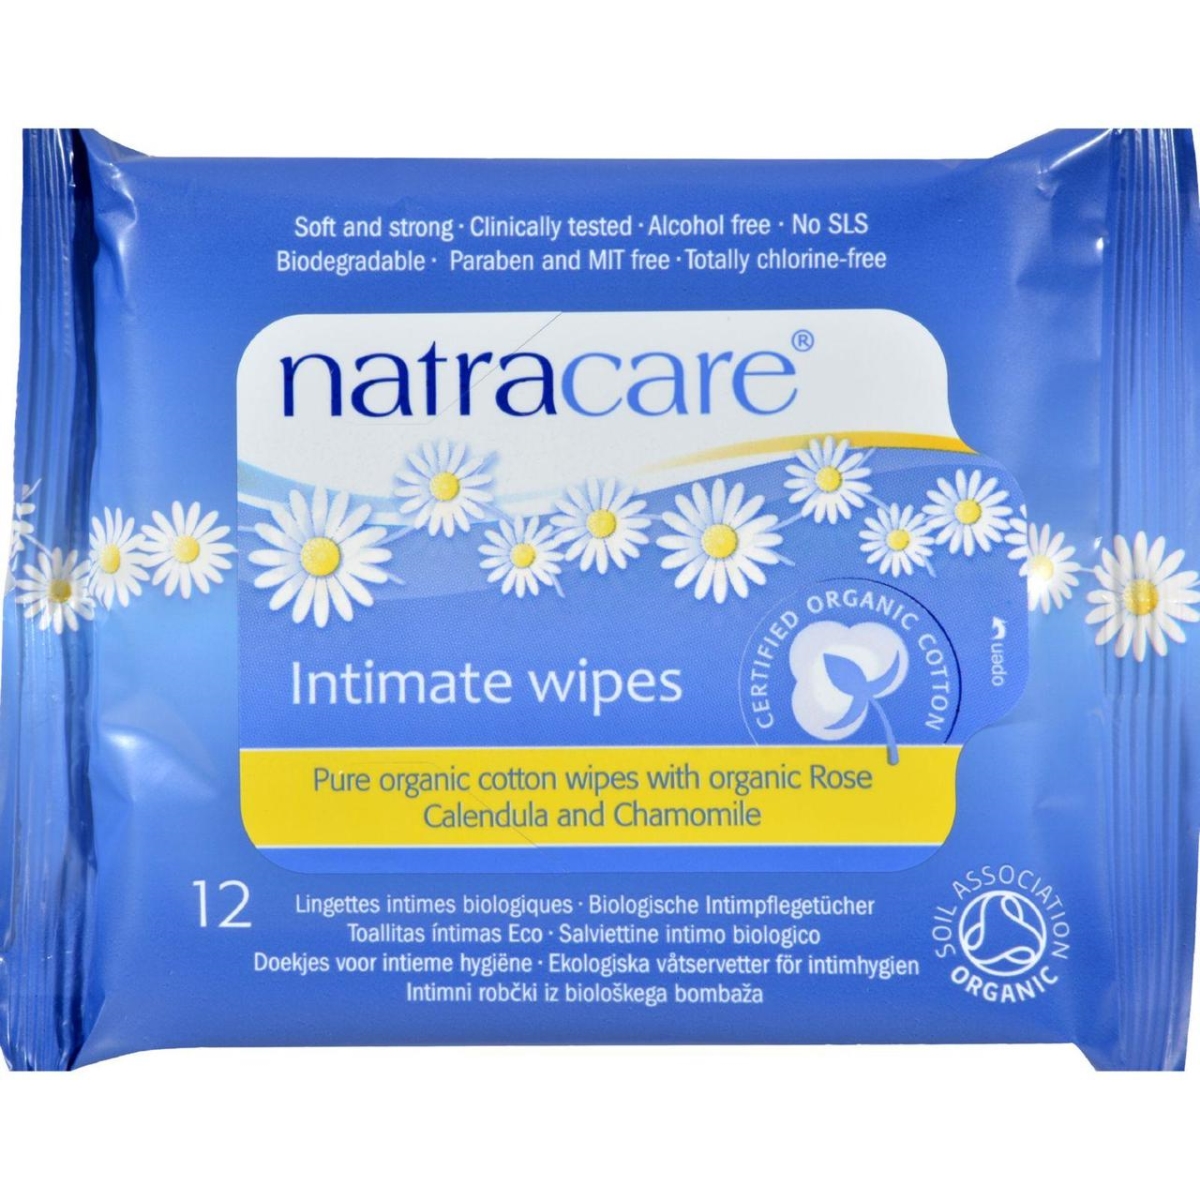 Hg0799015 Organic Cotton Intimate Wipes, 12 Wipes - Case Of 12